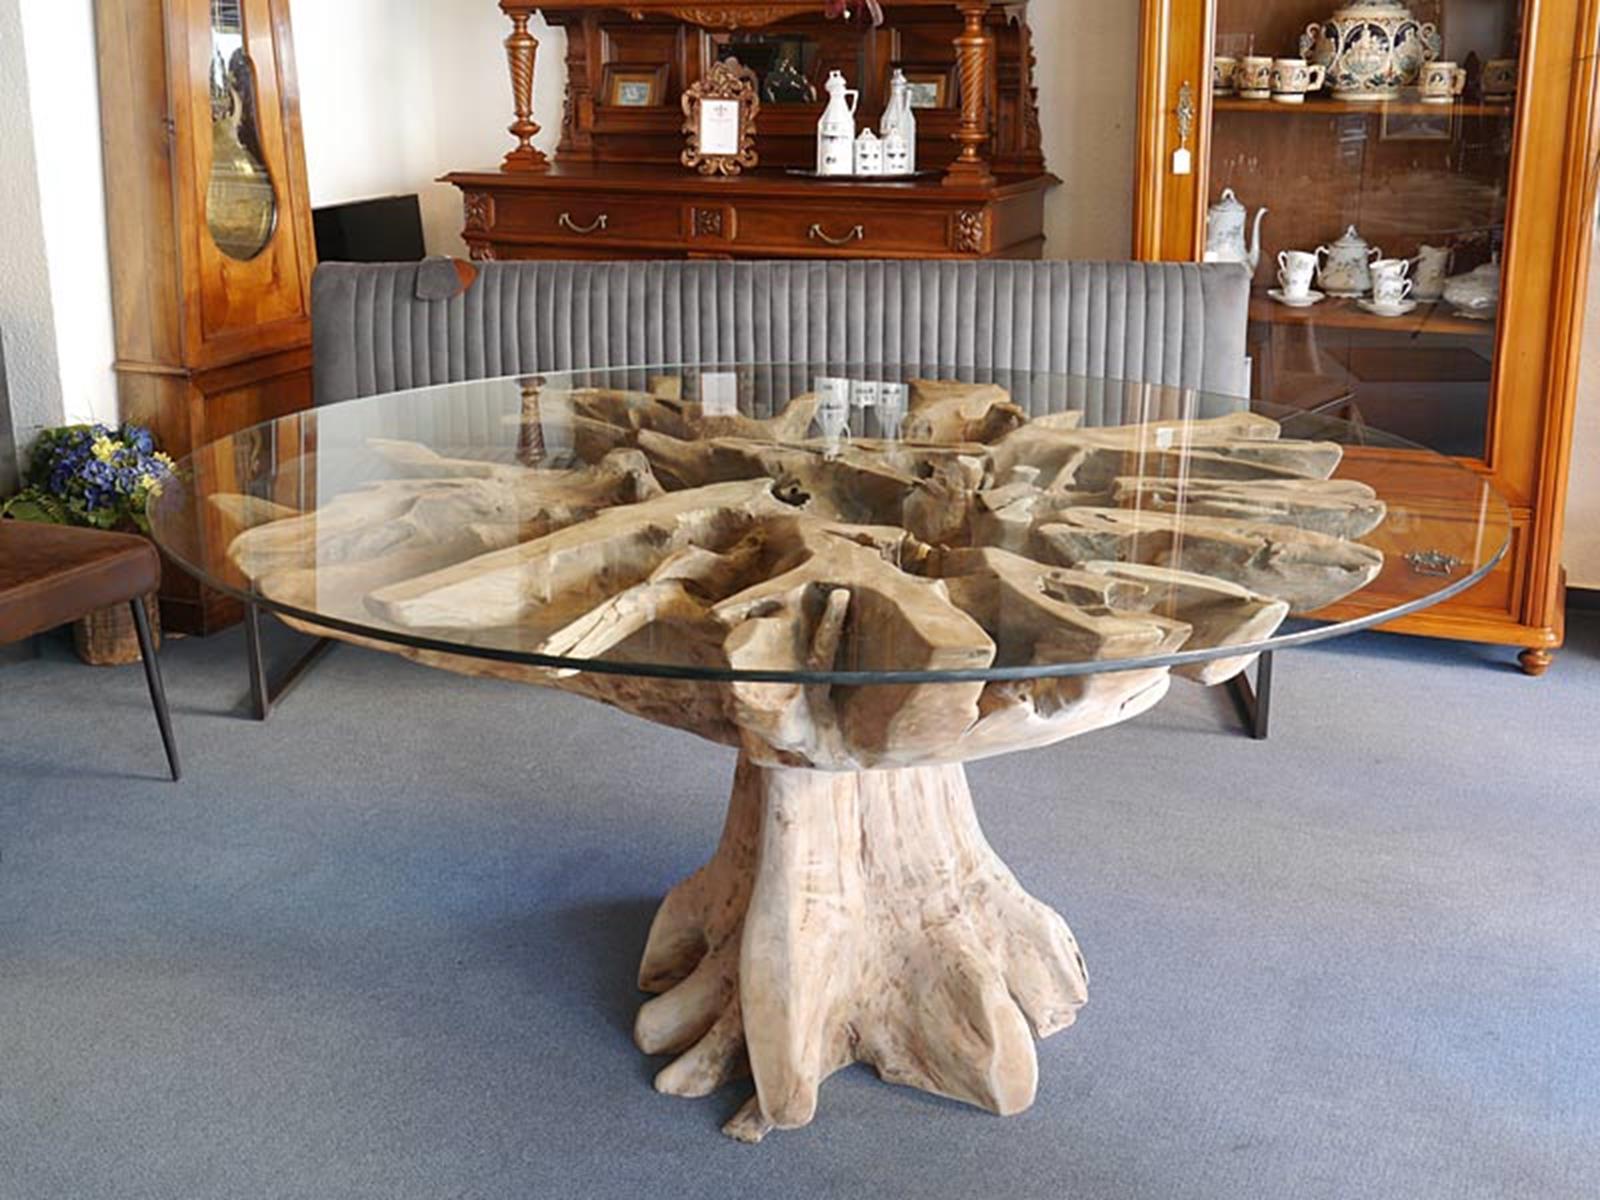 Exceptional dining table consisting of two giant teak tree roots combined with a 170 cm round glass top.
Due to the transparency of the glass, the structuring and shape of the root branches are very visible.
In particular, the wild, torn and